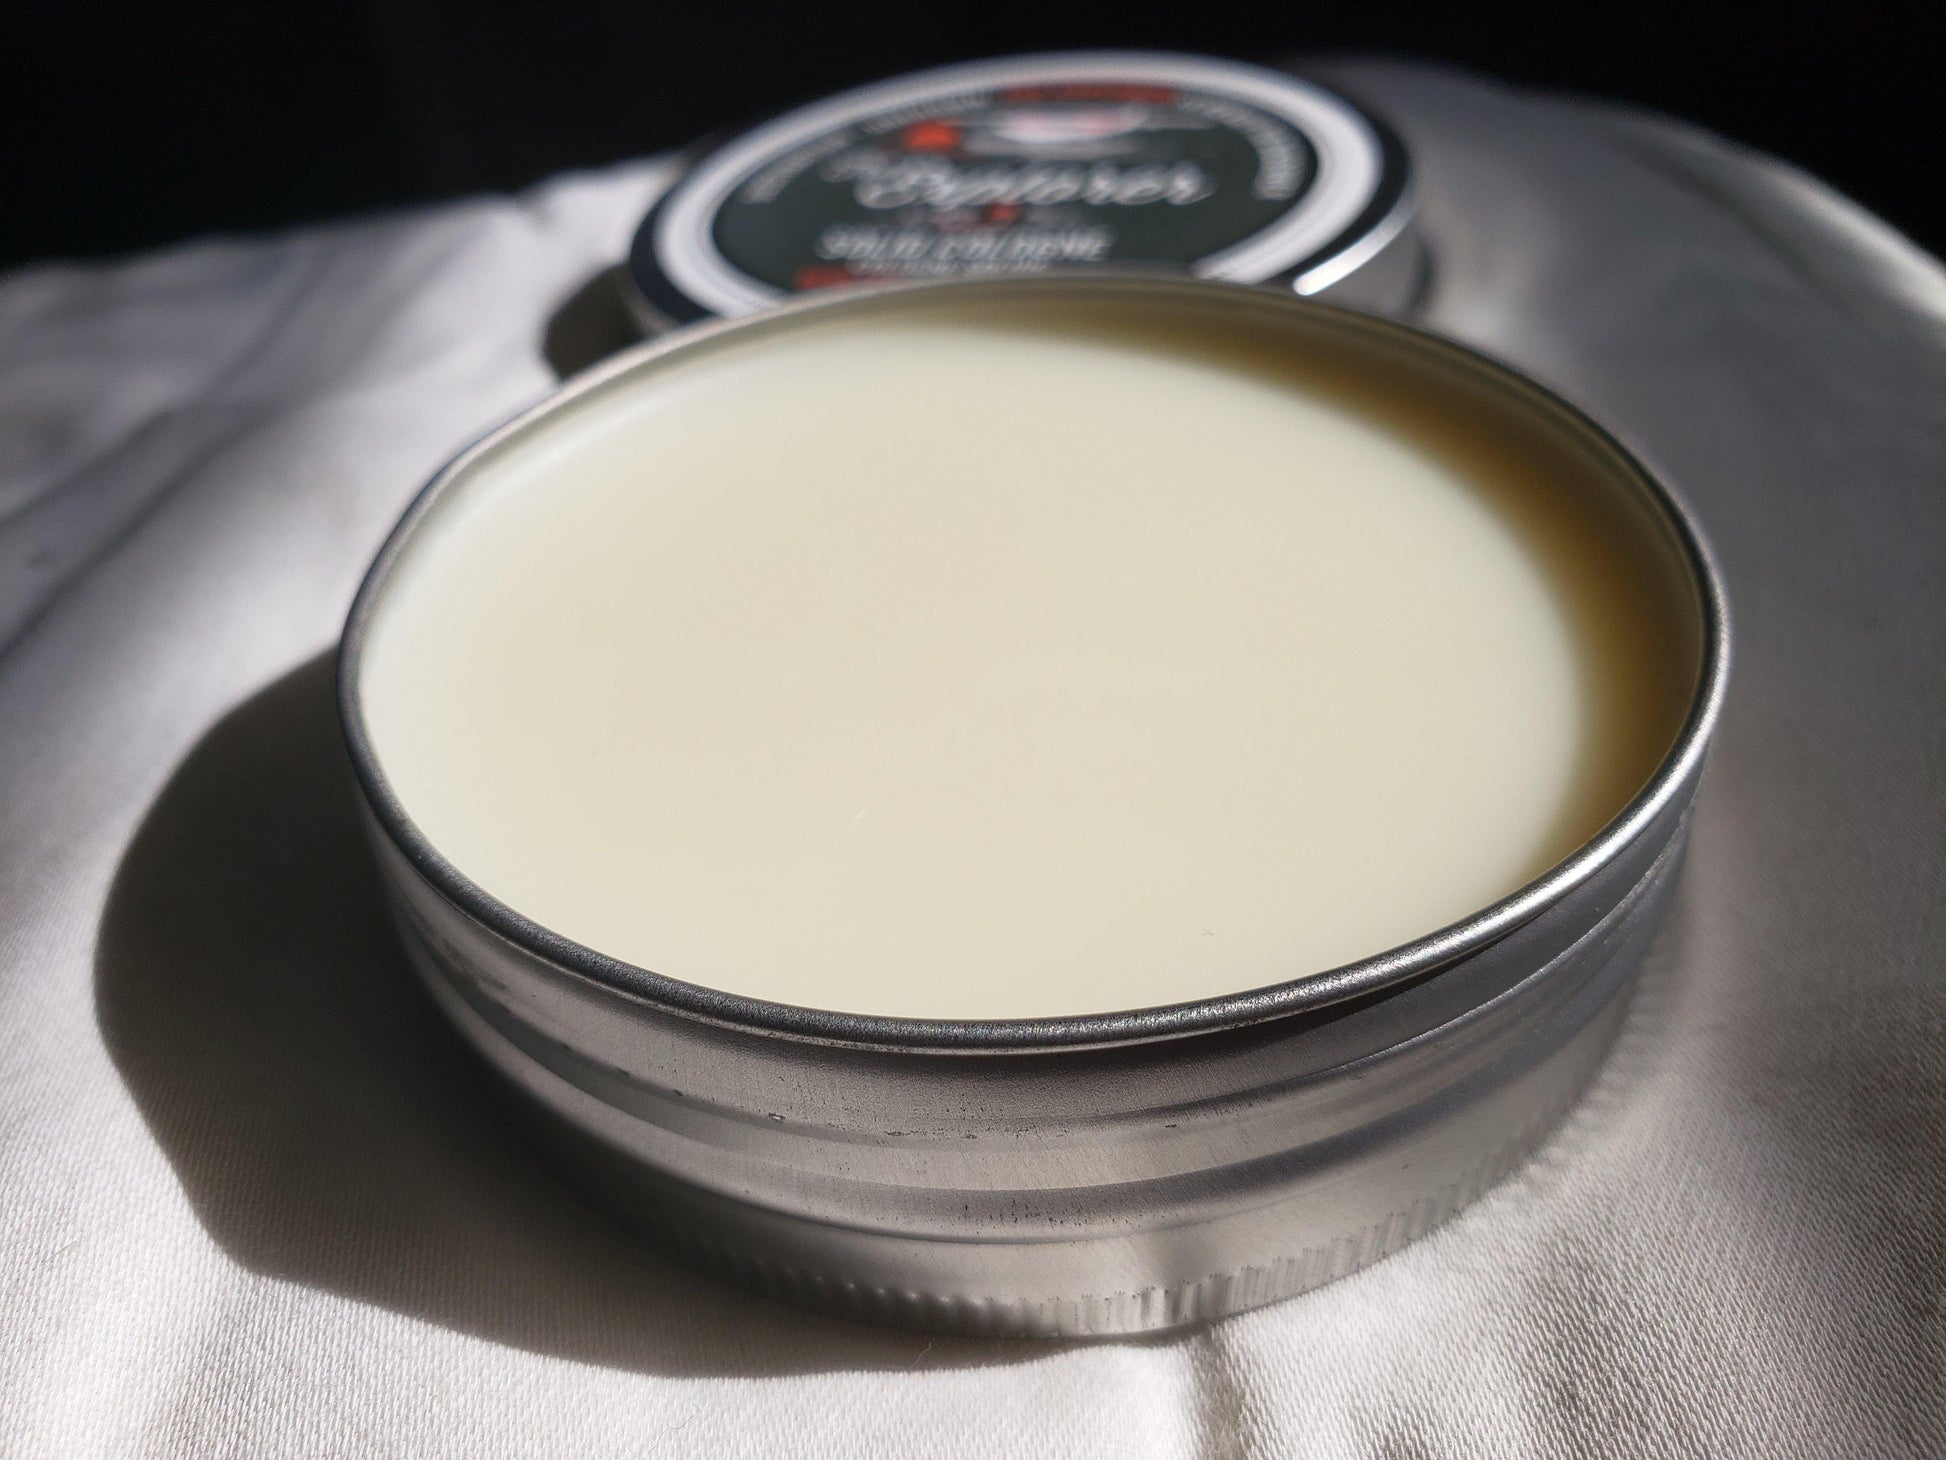 Canadian Natural Solid Cologne - Maple Bark & Portage Trail - The Wandering Merchant